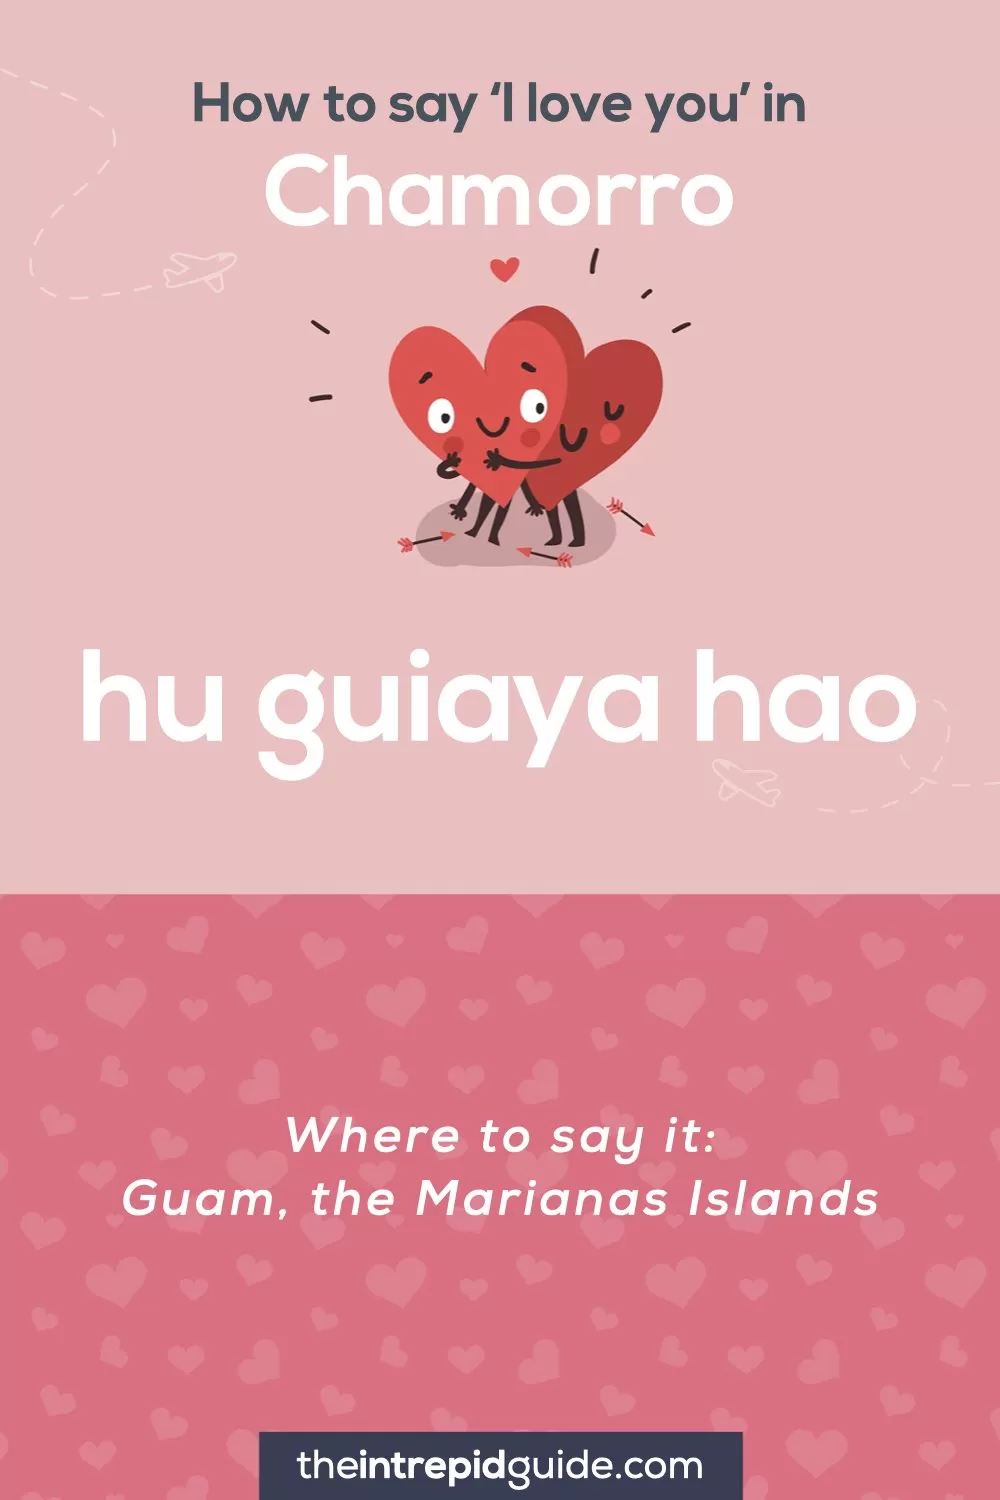 How to say I love you in different languages - Chamorro - hu guiaya hao